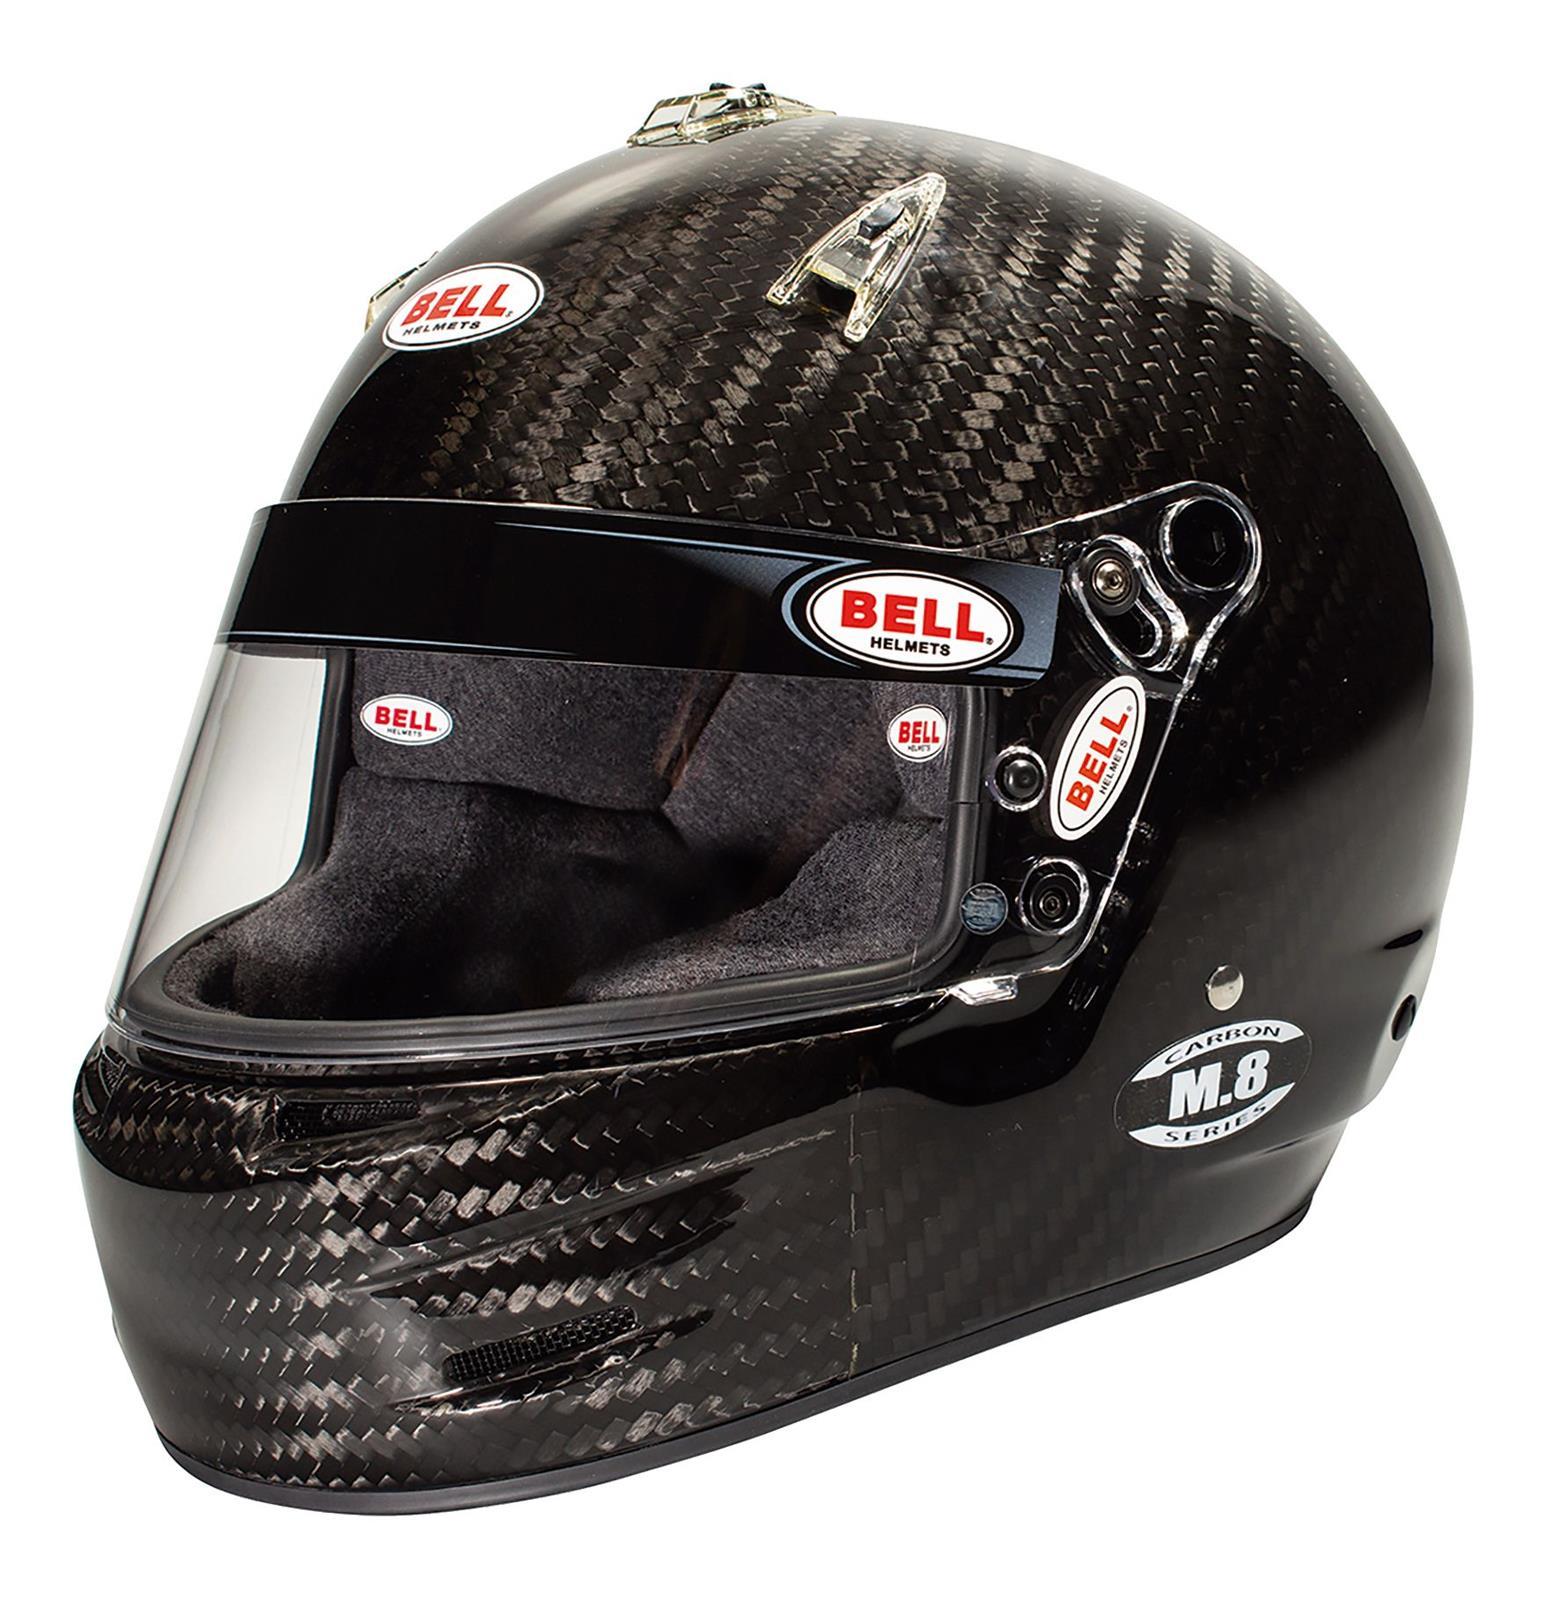 Bell Helmets 1208A05 Helmet, M8, Snell SA2020, FIA Approved, Head and Neck Support Ready, Carbon Fiber, Size 7-3/8+, Each